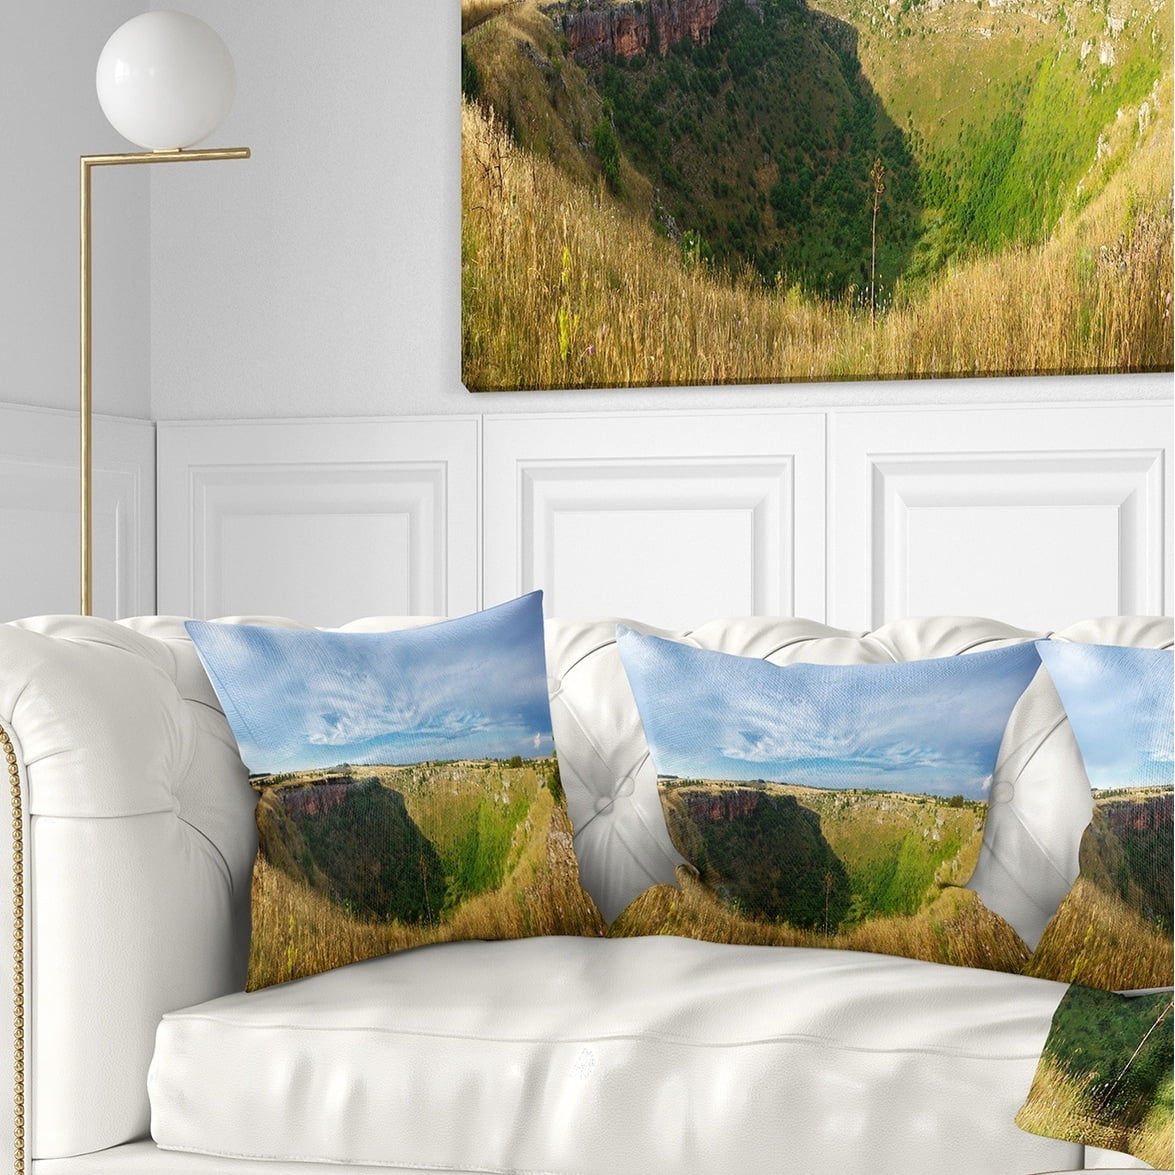 Sofa Throw Pillow x 16 in Designart CU12551-16-16 Caucasus Mountains Panorama Landscape Printed Cushion Cover for Living Room Insert Side